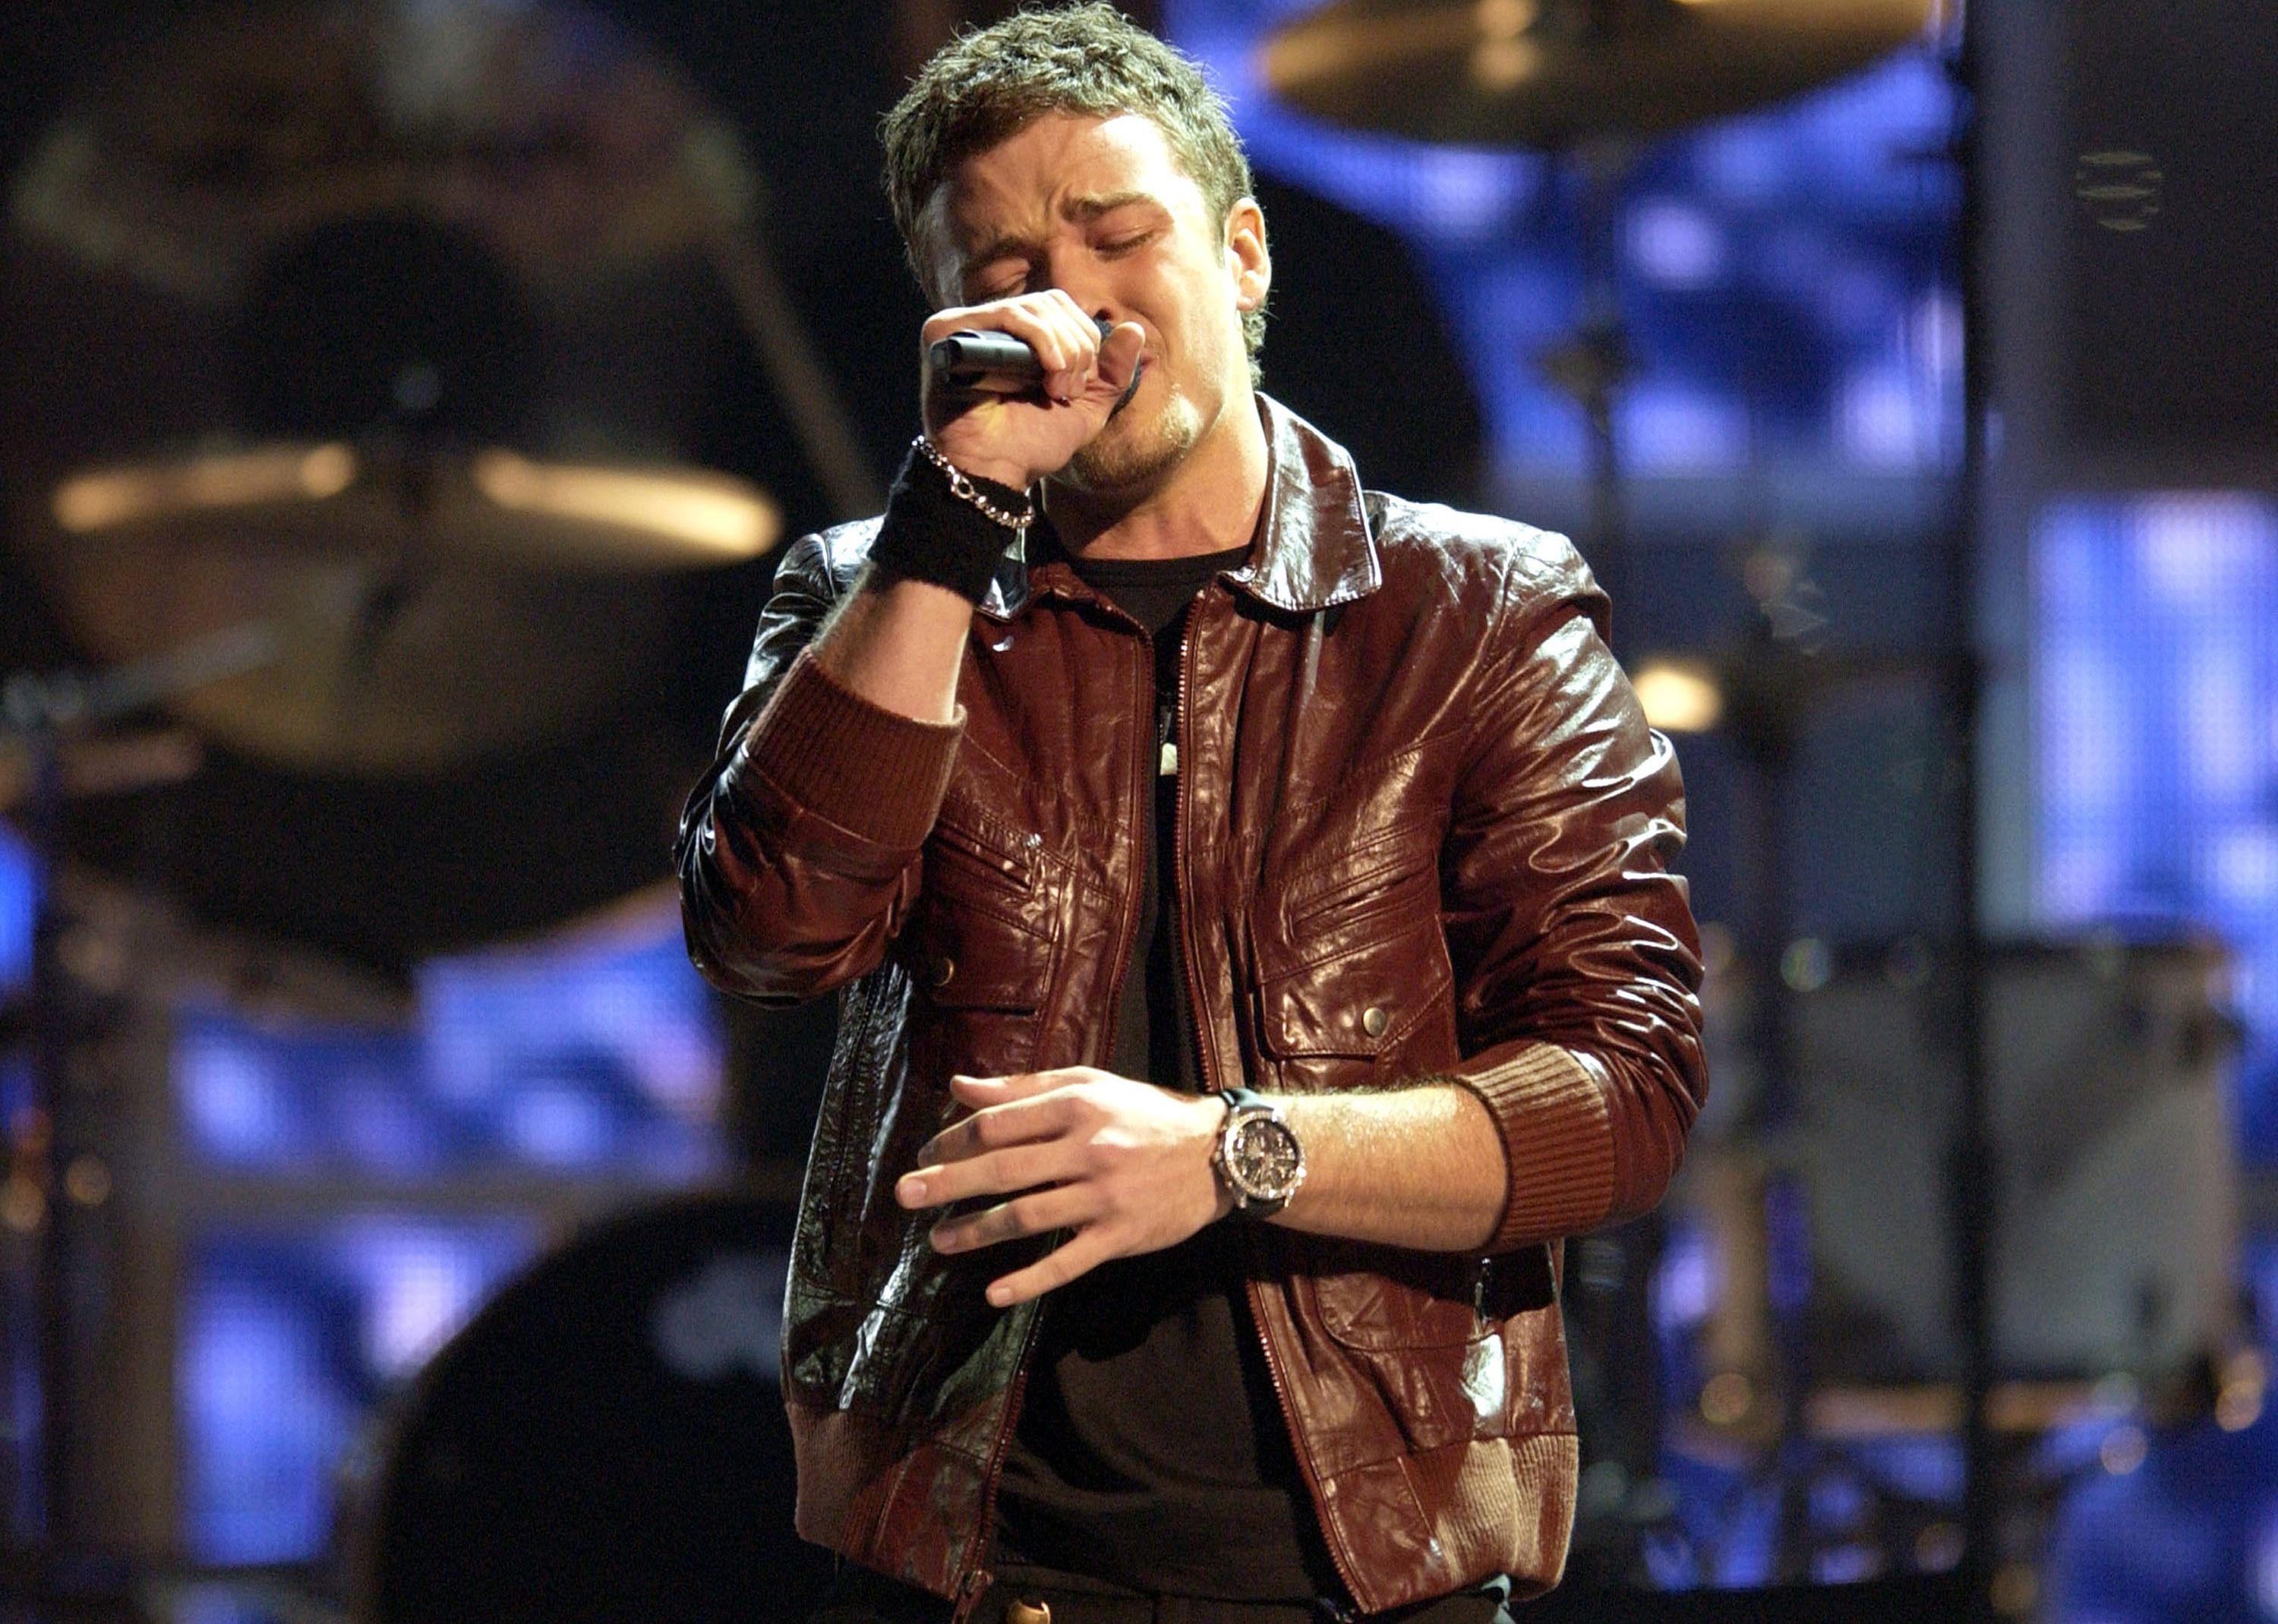 Justin Timberlake onstage wearing a brown leather jacket and singing